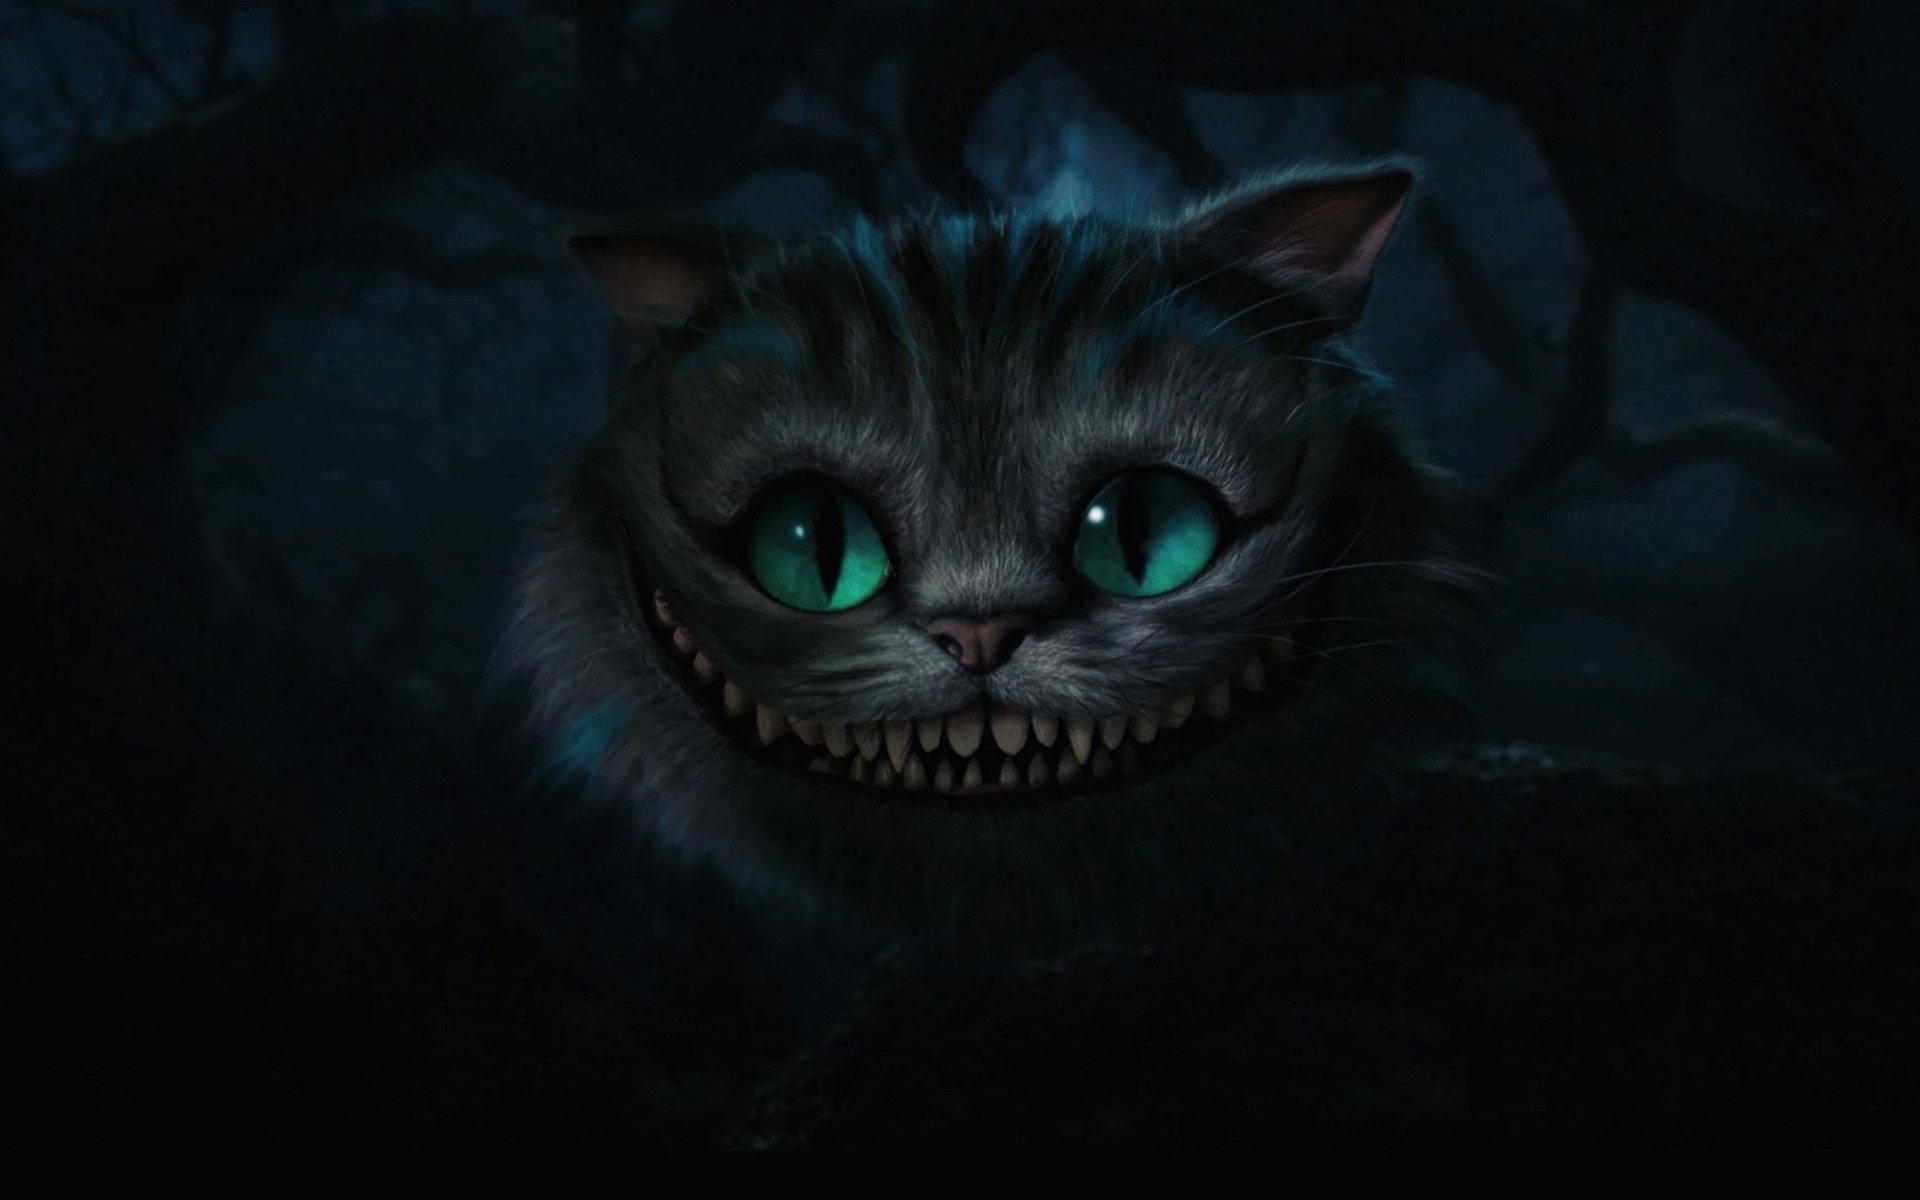 alice in wonderland cheshire cat 1920x1200 wallpaper High Quality